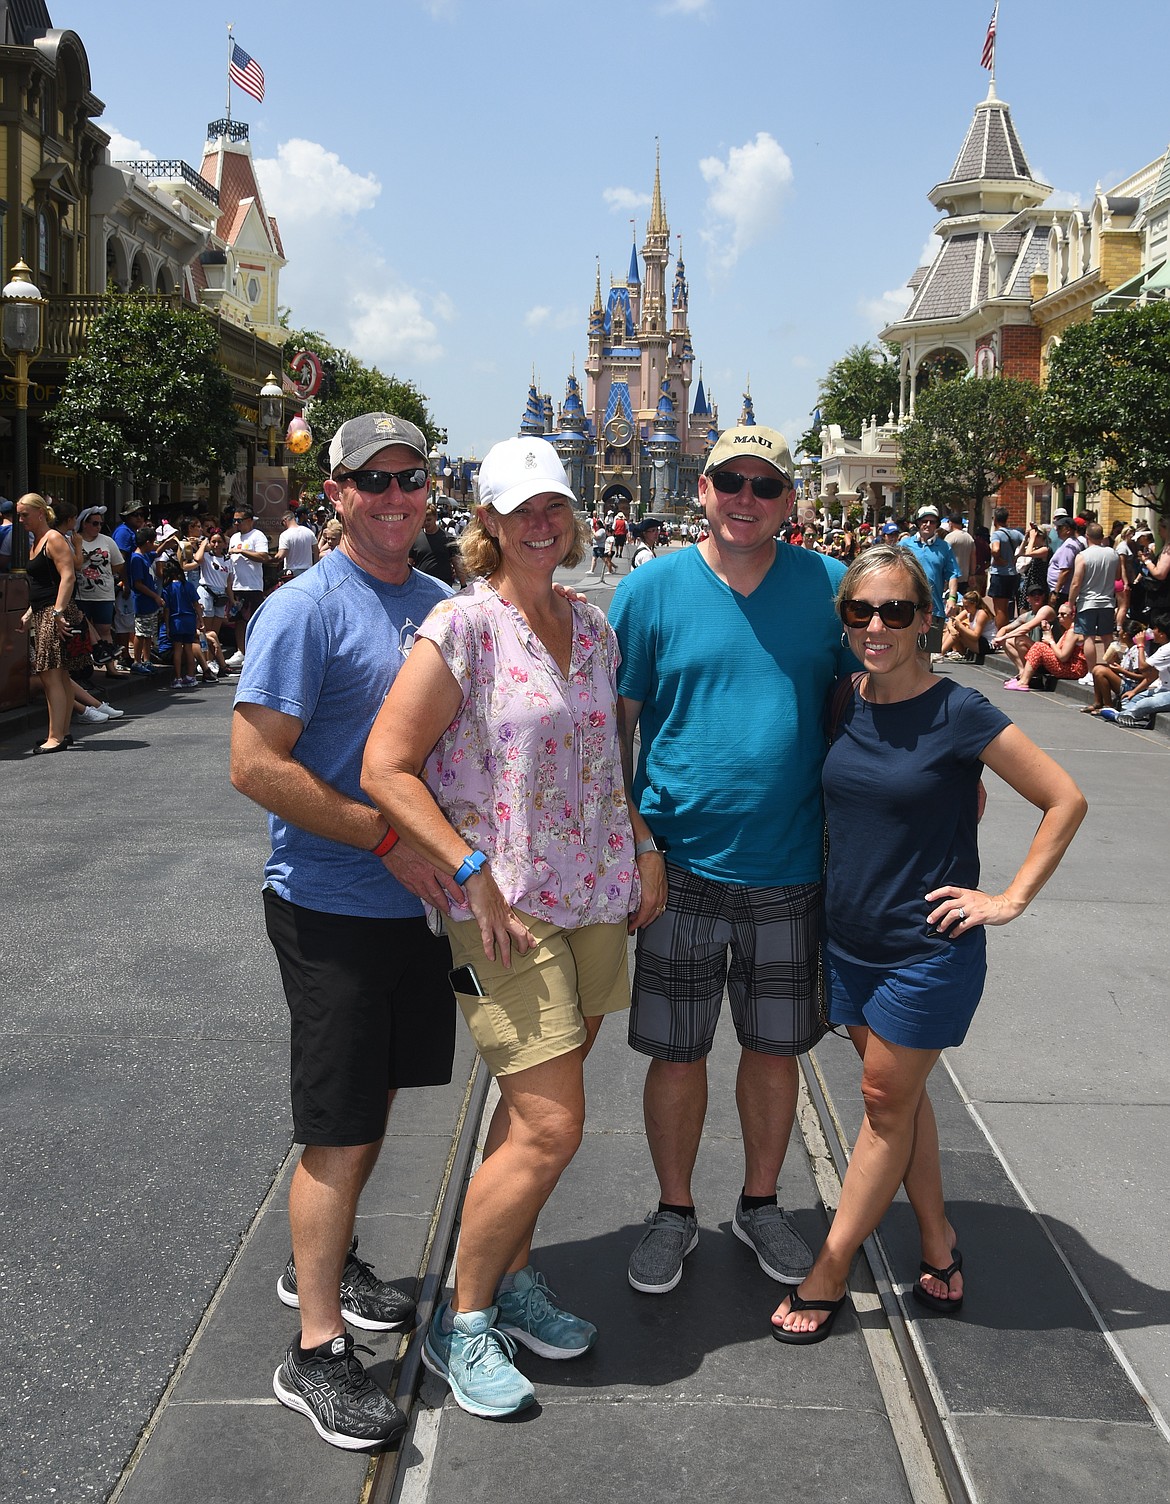 From left, Andy and Lisa Peterson and Scott and Tara Ovinek on Disneyworld’s Main Street, USA.